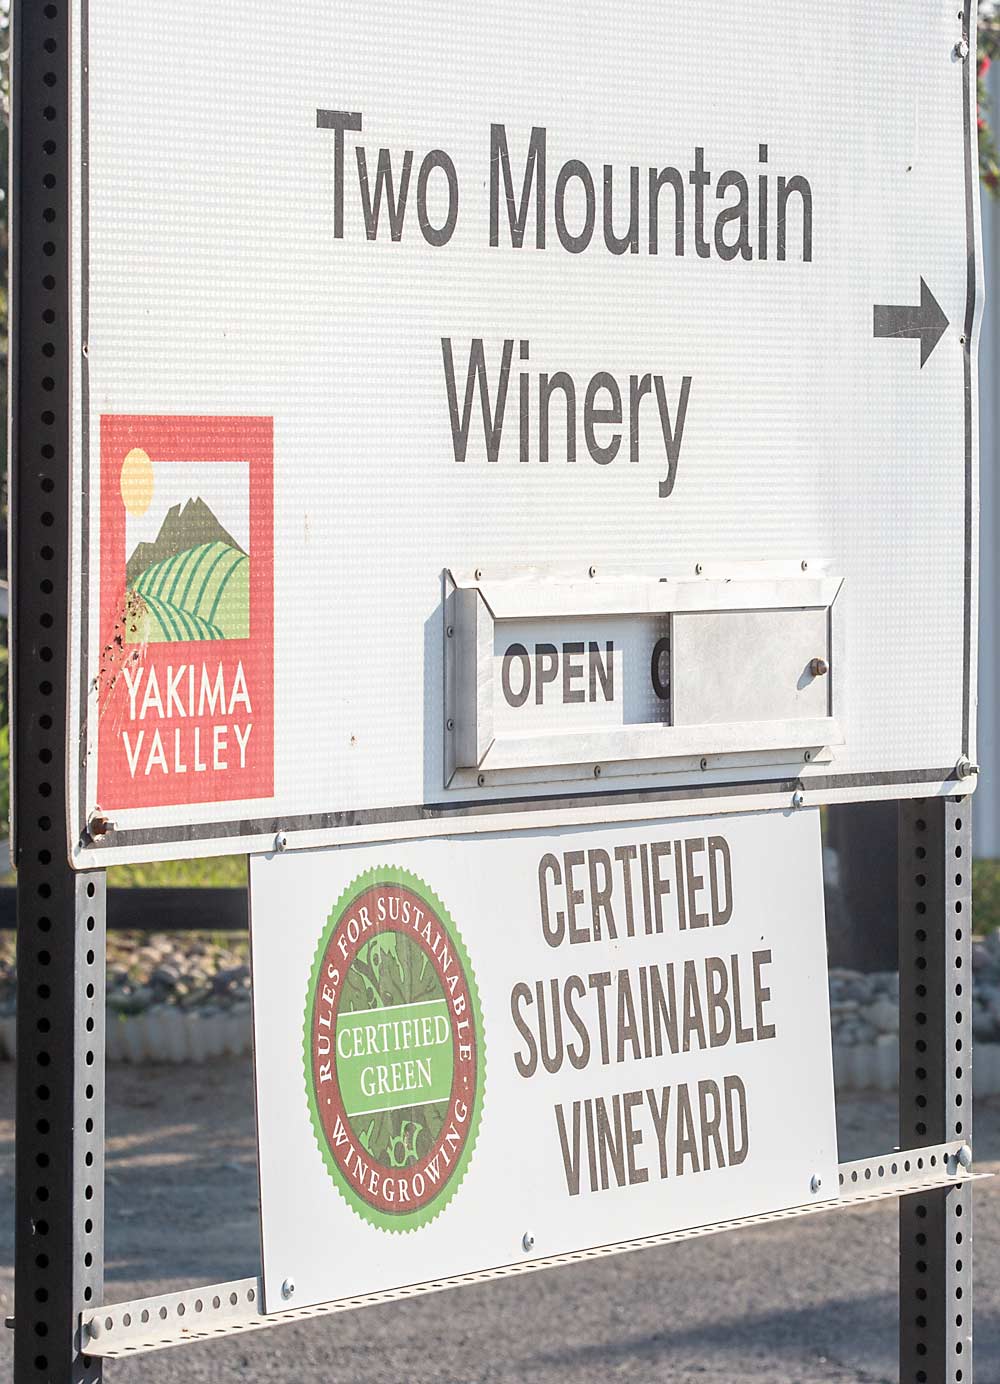 Two Mountain Winery near Zillah, Washington, currently participates in the California-based Lodi Rules certification until Washington industry officials finish development of their own sustainability certification program. (Ross Courtney/Good Fruit Grower)